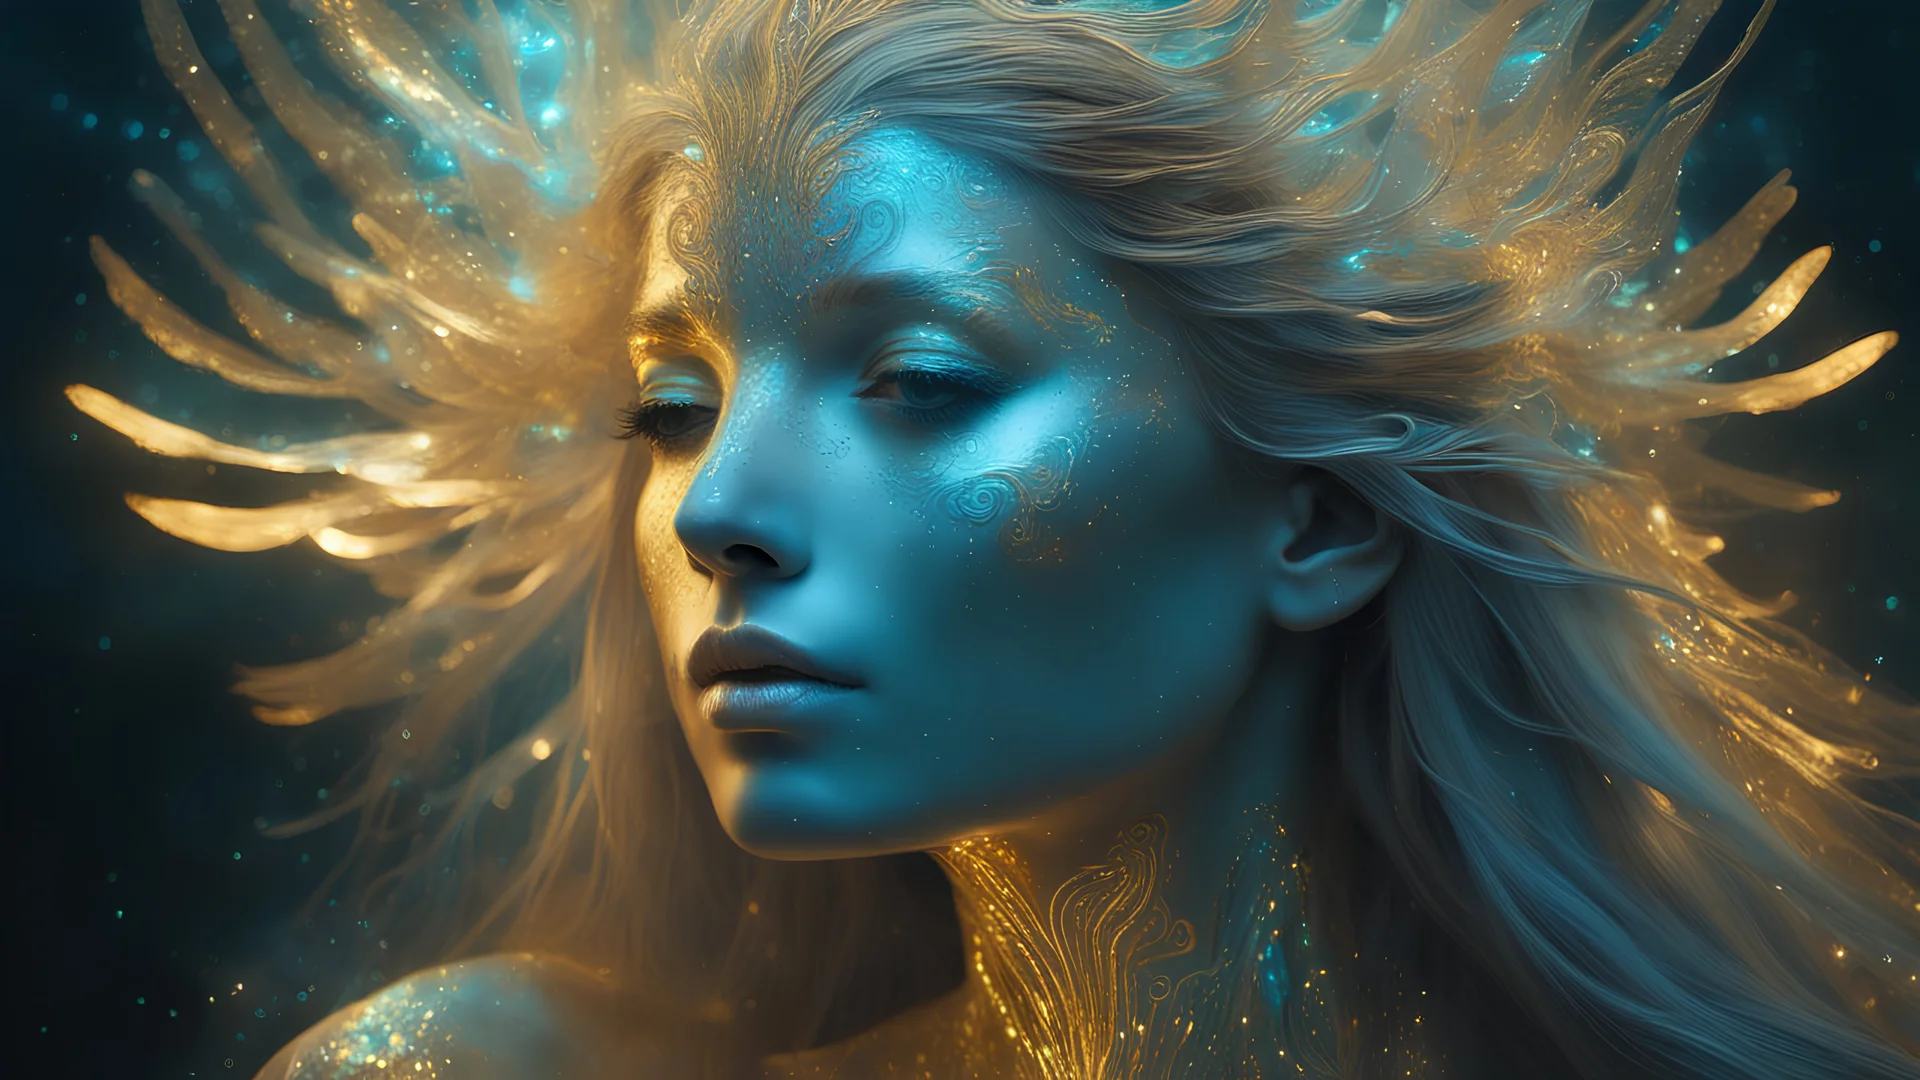 Photo in bioluminescent art style depicting a divine bird woman, embossed, double exposure, bird, Bioluminescent wet translucent glowing skin, ethereal glowing eyes, long neck, bird, perfect face in ultra-realistic details, gold, flowing hair, Composition imitates cinematic film with dazzling, golden and silver lighting effects. Intricate details, sharp focus, crystal clear skin create high detail. 3d, 64k, high resolution, high detail, computer graphics, hyperrealism, f/16, 1/300 sec. digital p